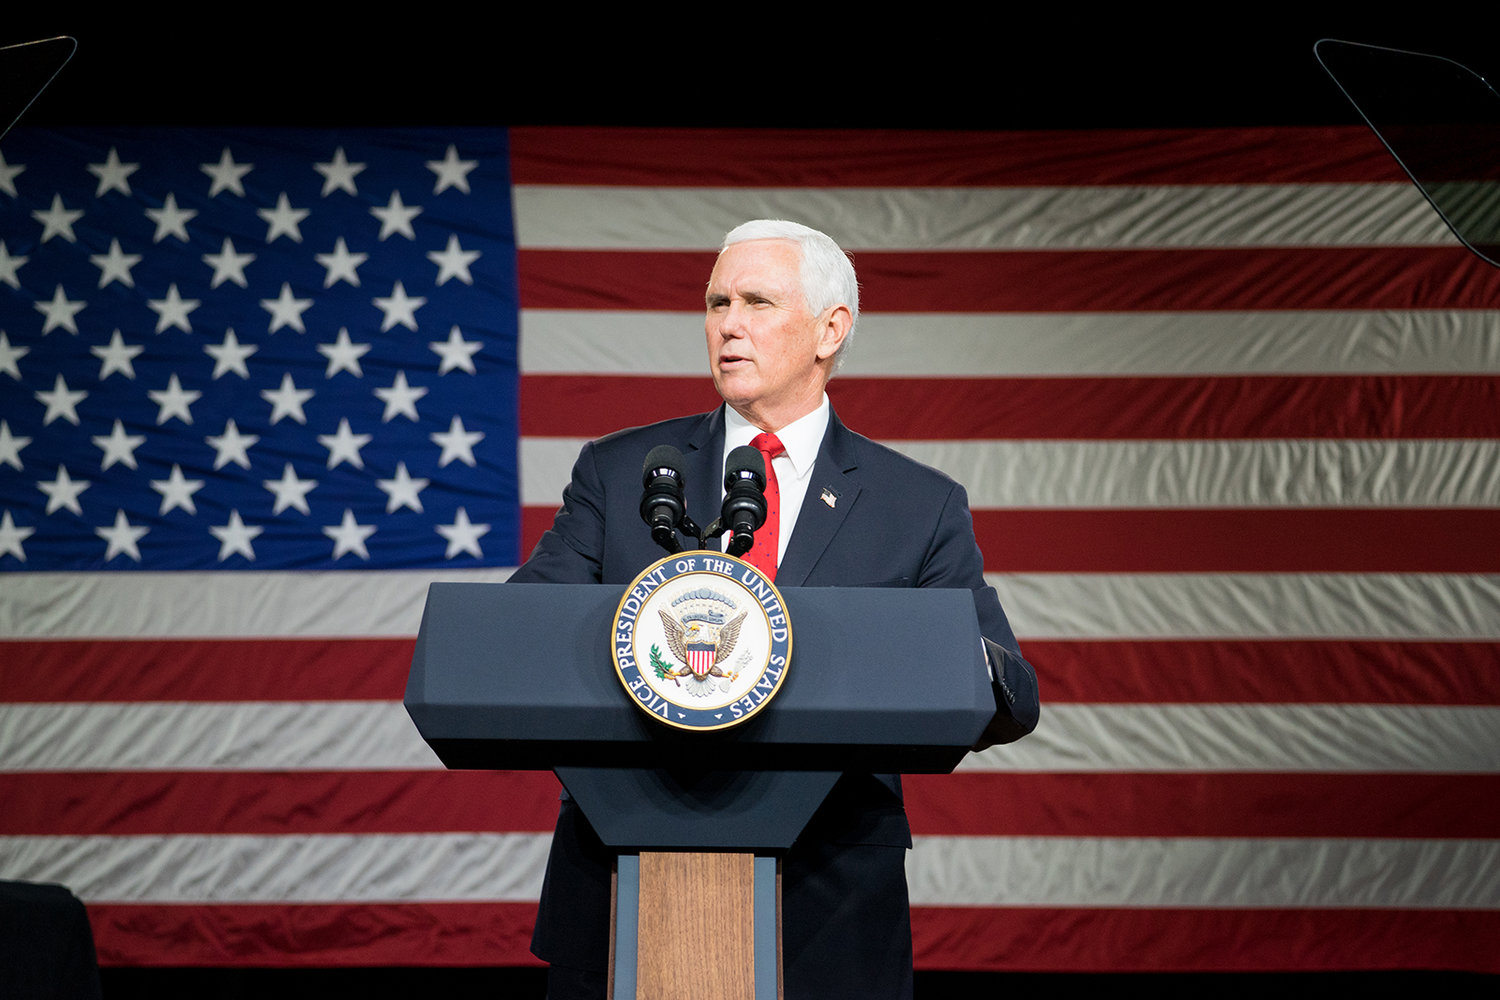 U.S. Vice President Mike Pence speaks during a visit to Rock Springs Church to campaign for GOP Senate candidates  on Jan. 4, 2021, in Milner, Georgia. (Megan Varner/Getty Images/TNS)